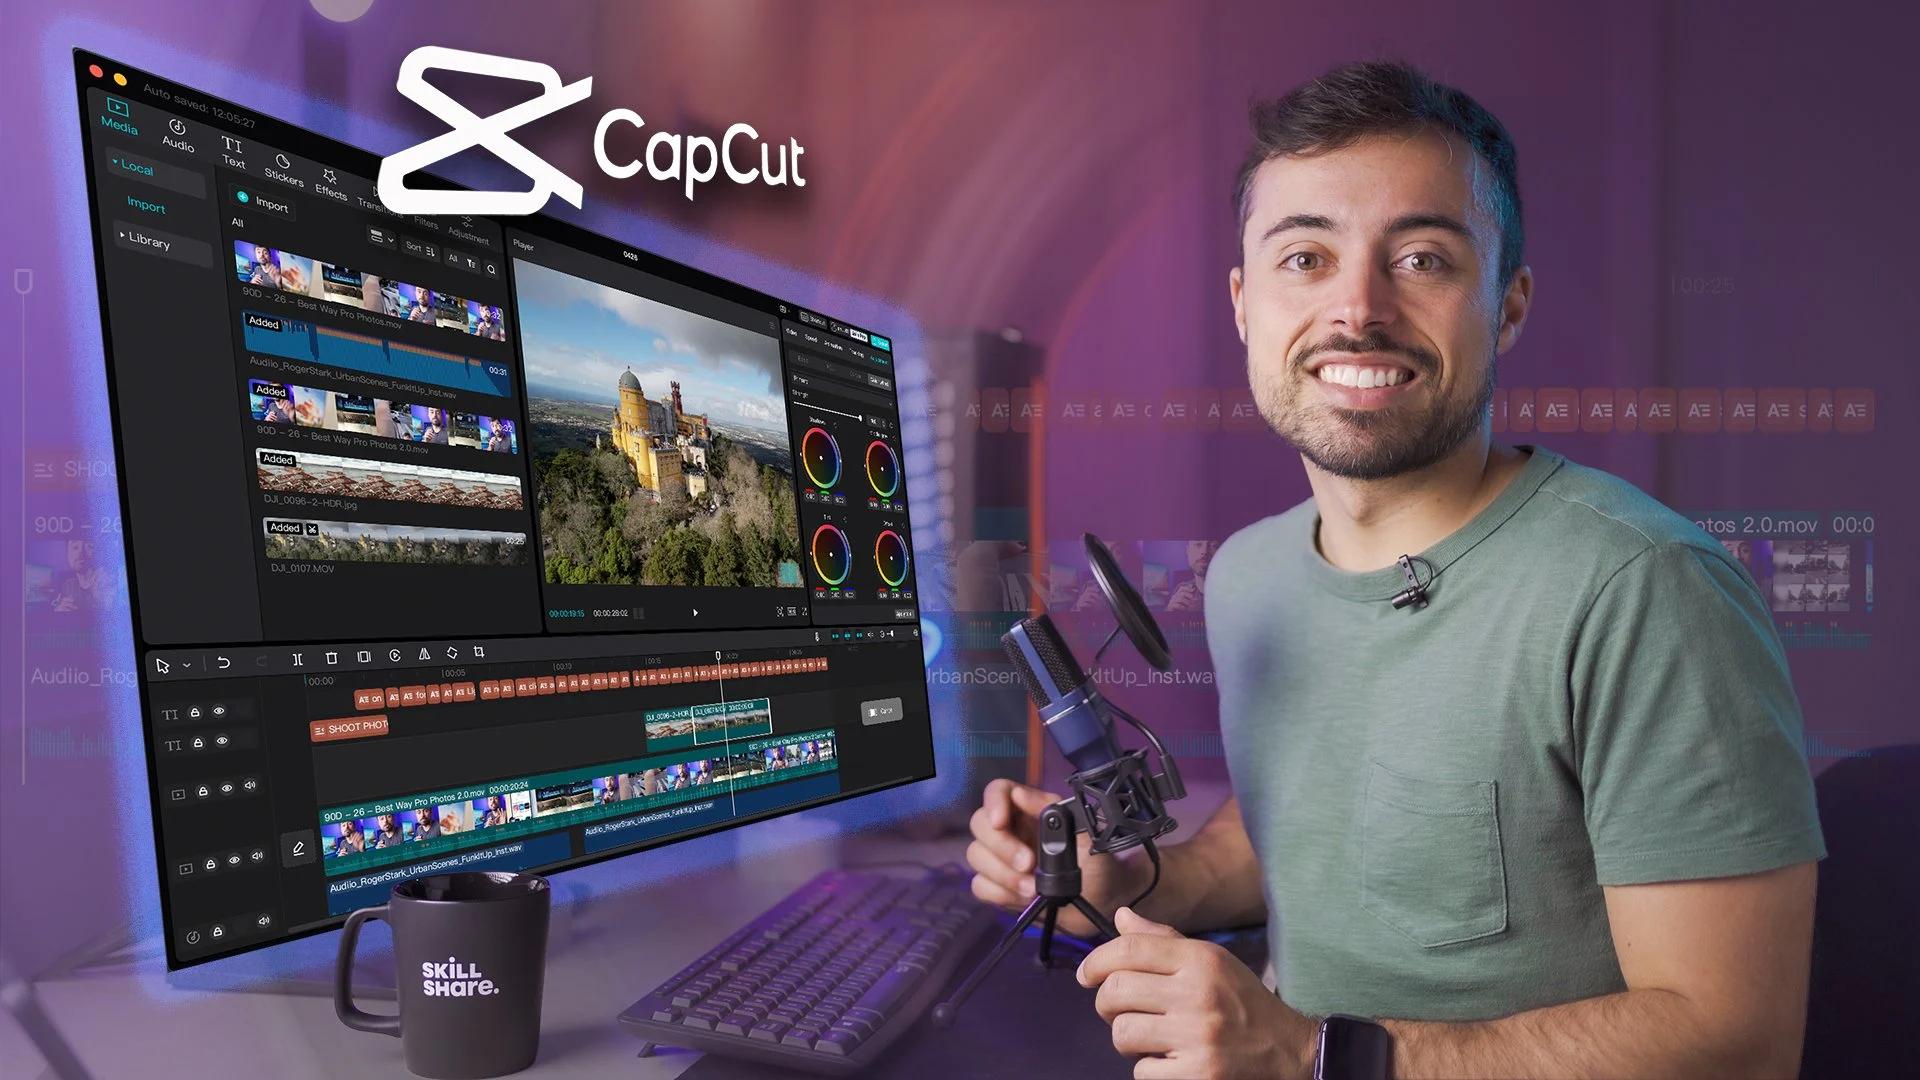 Capcut for Desktop: The Ultimate Video Editing Course for Reels and TikTok Creators